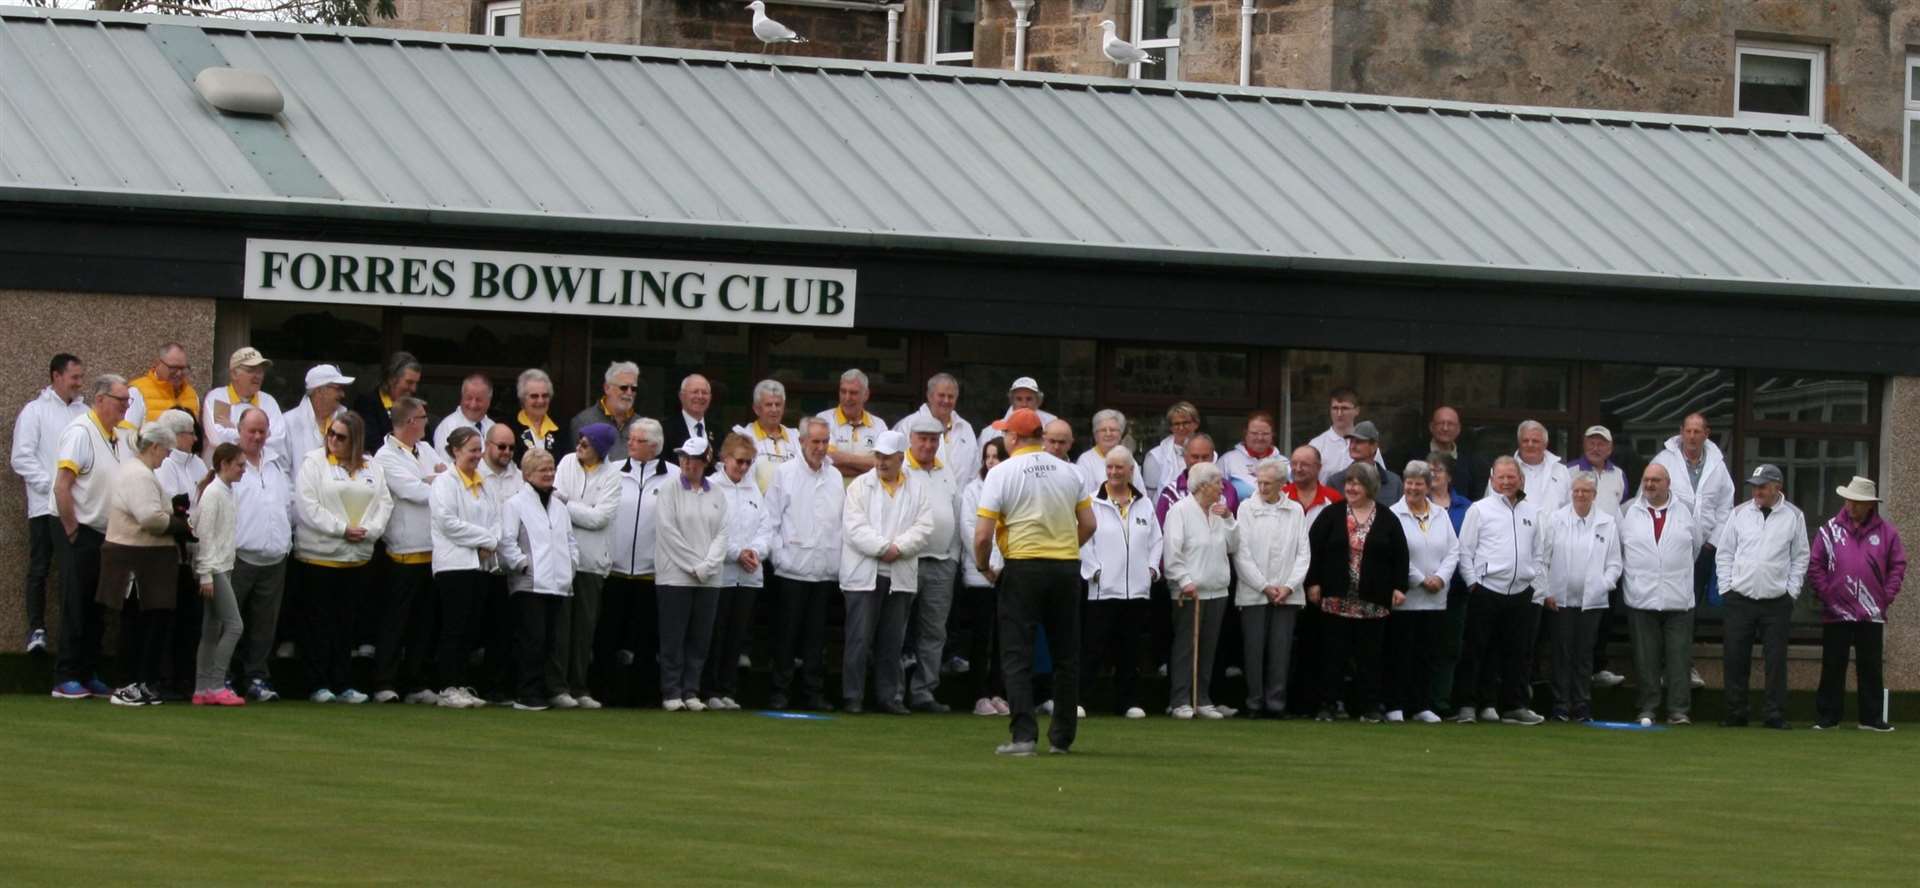 Members get ready for the first action on the Forres bowling green.